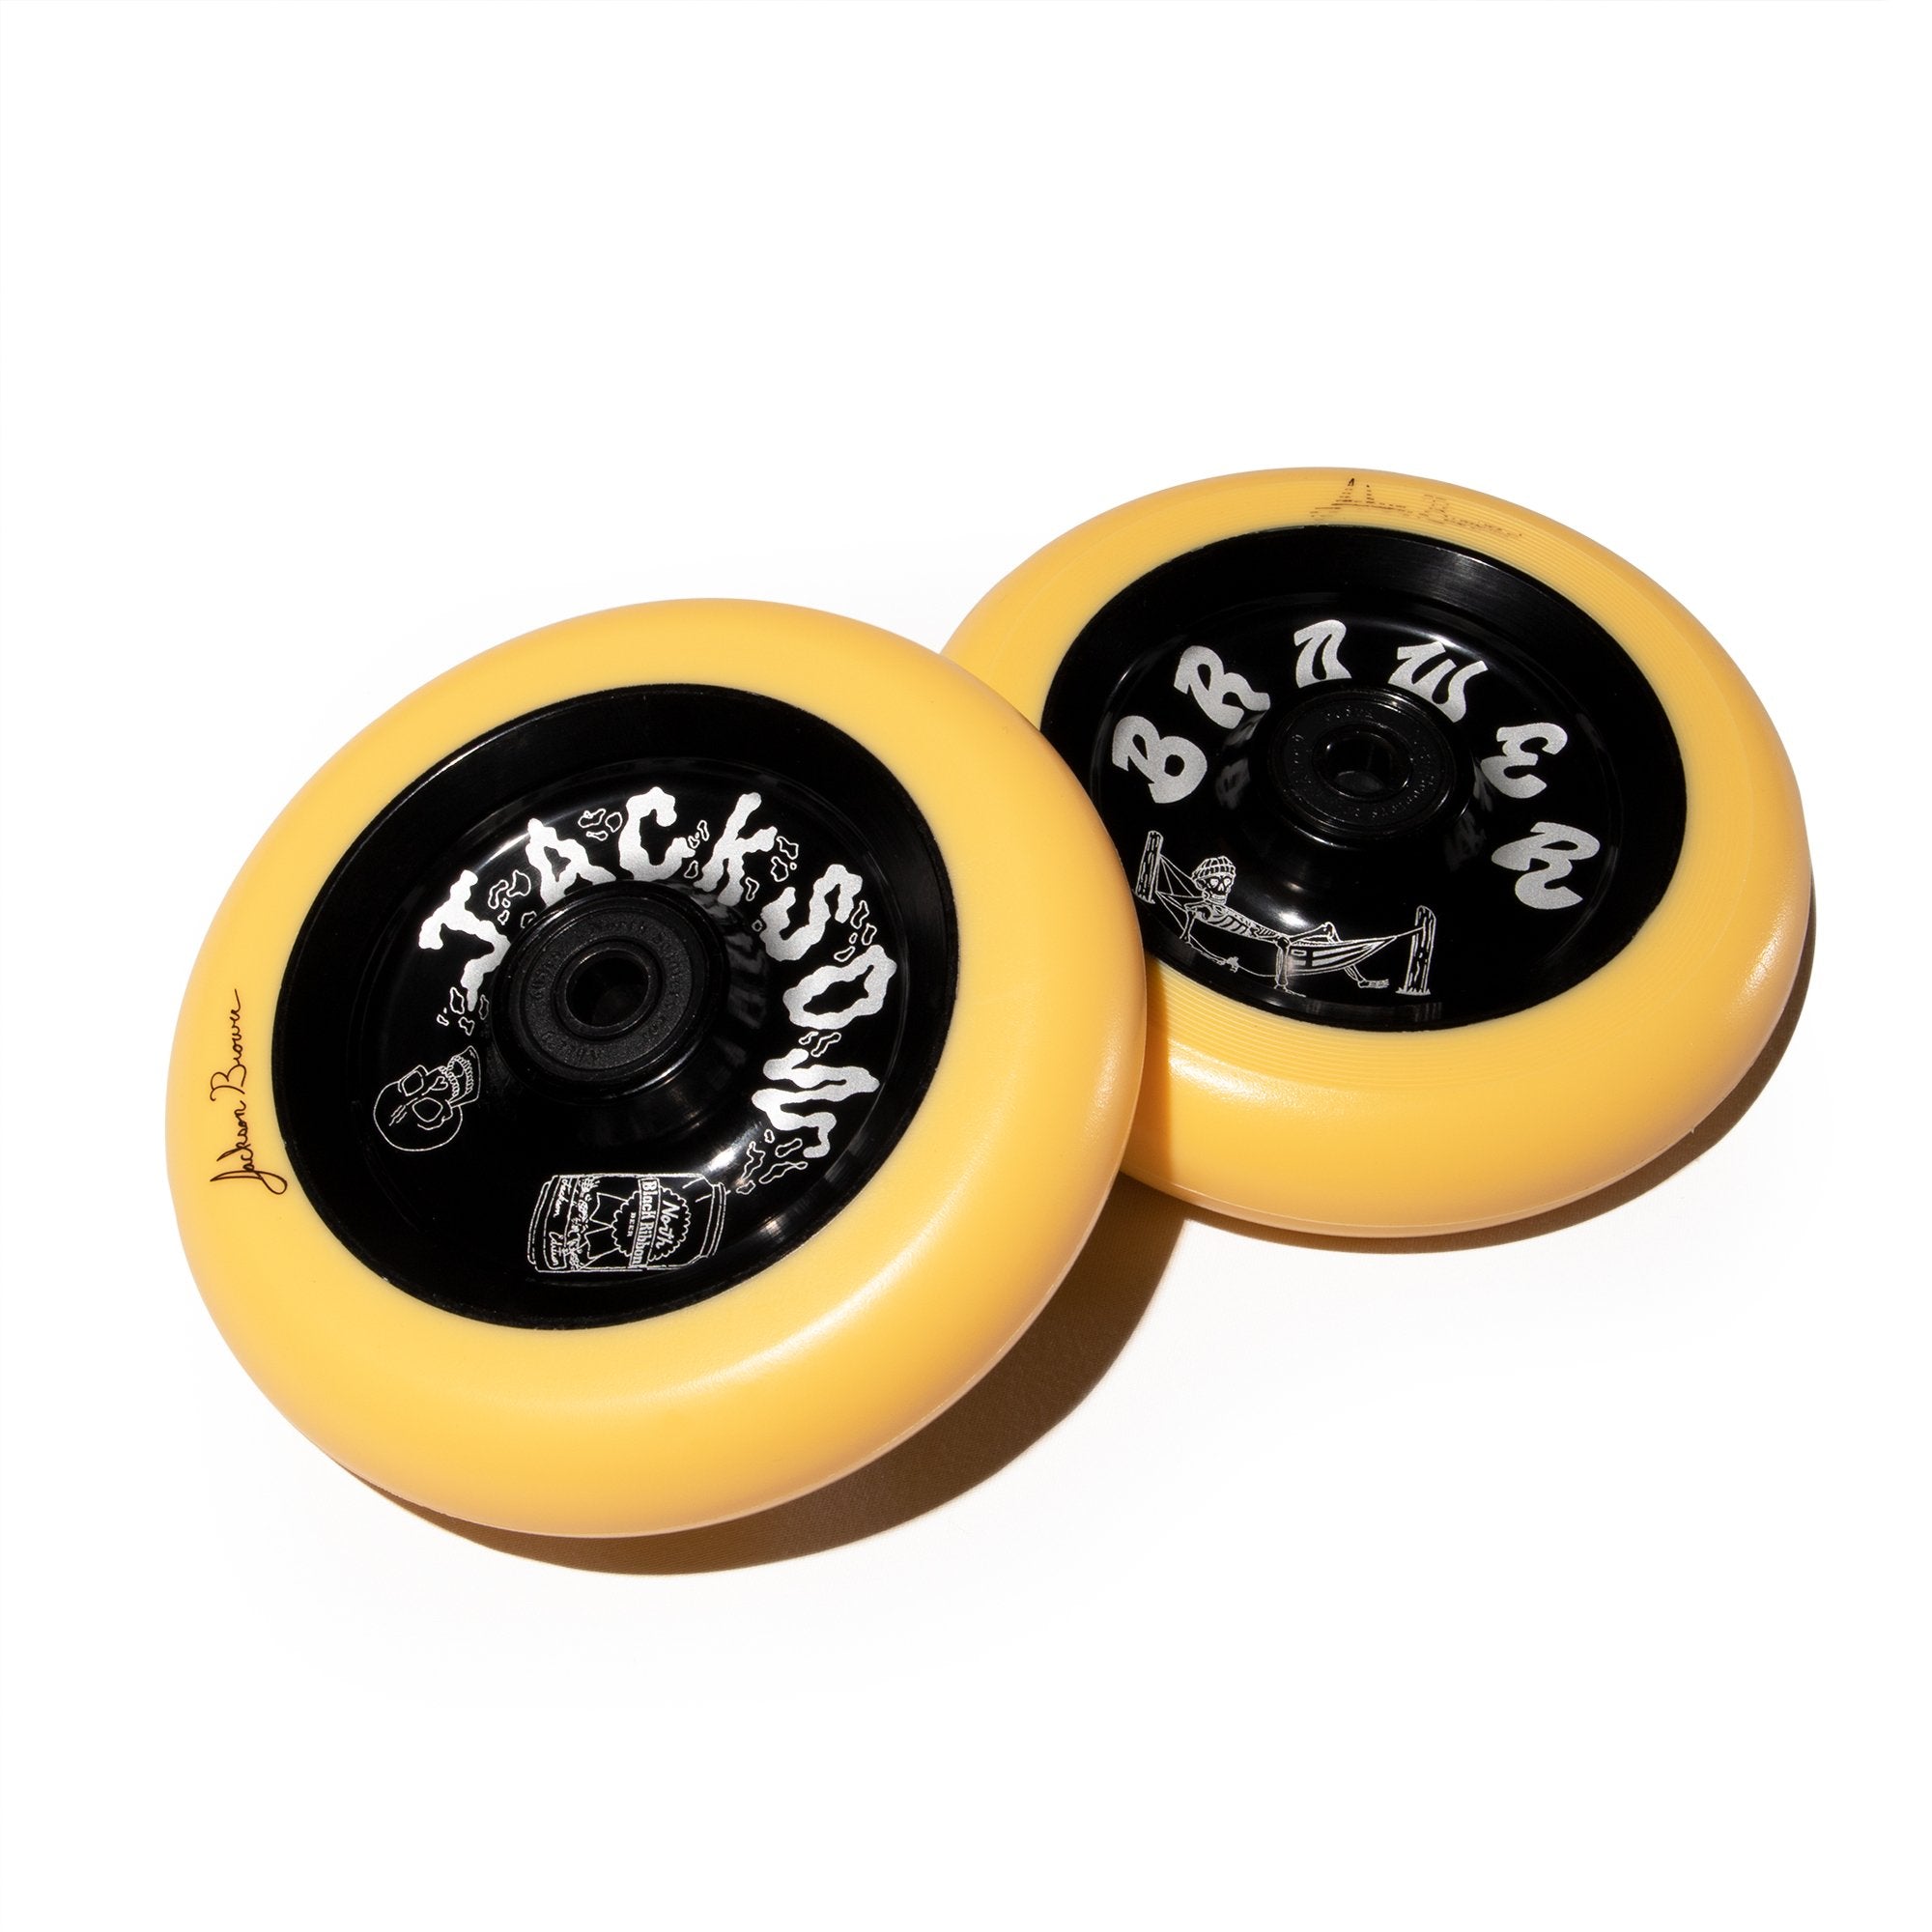 North Scooters Jackson Brower Signature 115X30mm (PAIR) - Scooter Wheels Set